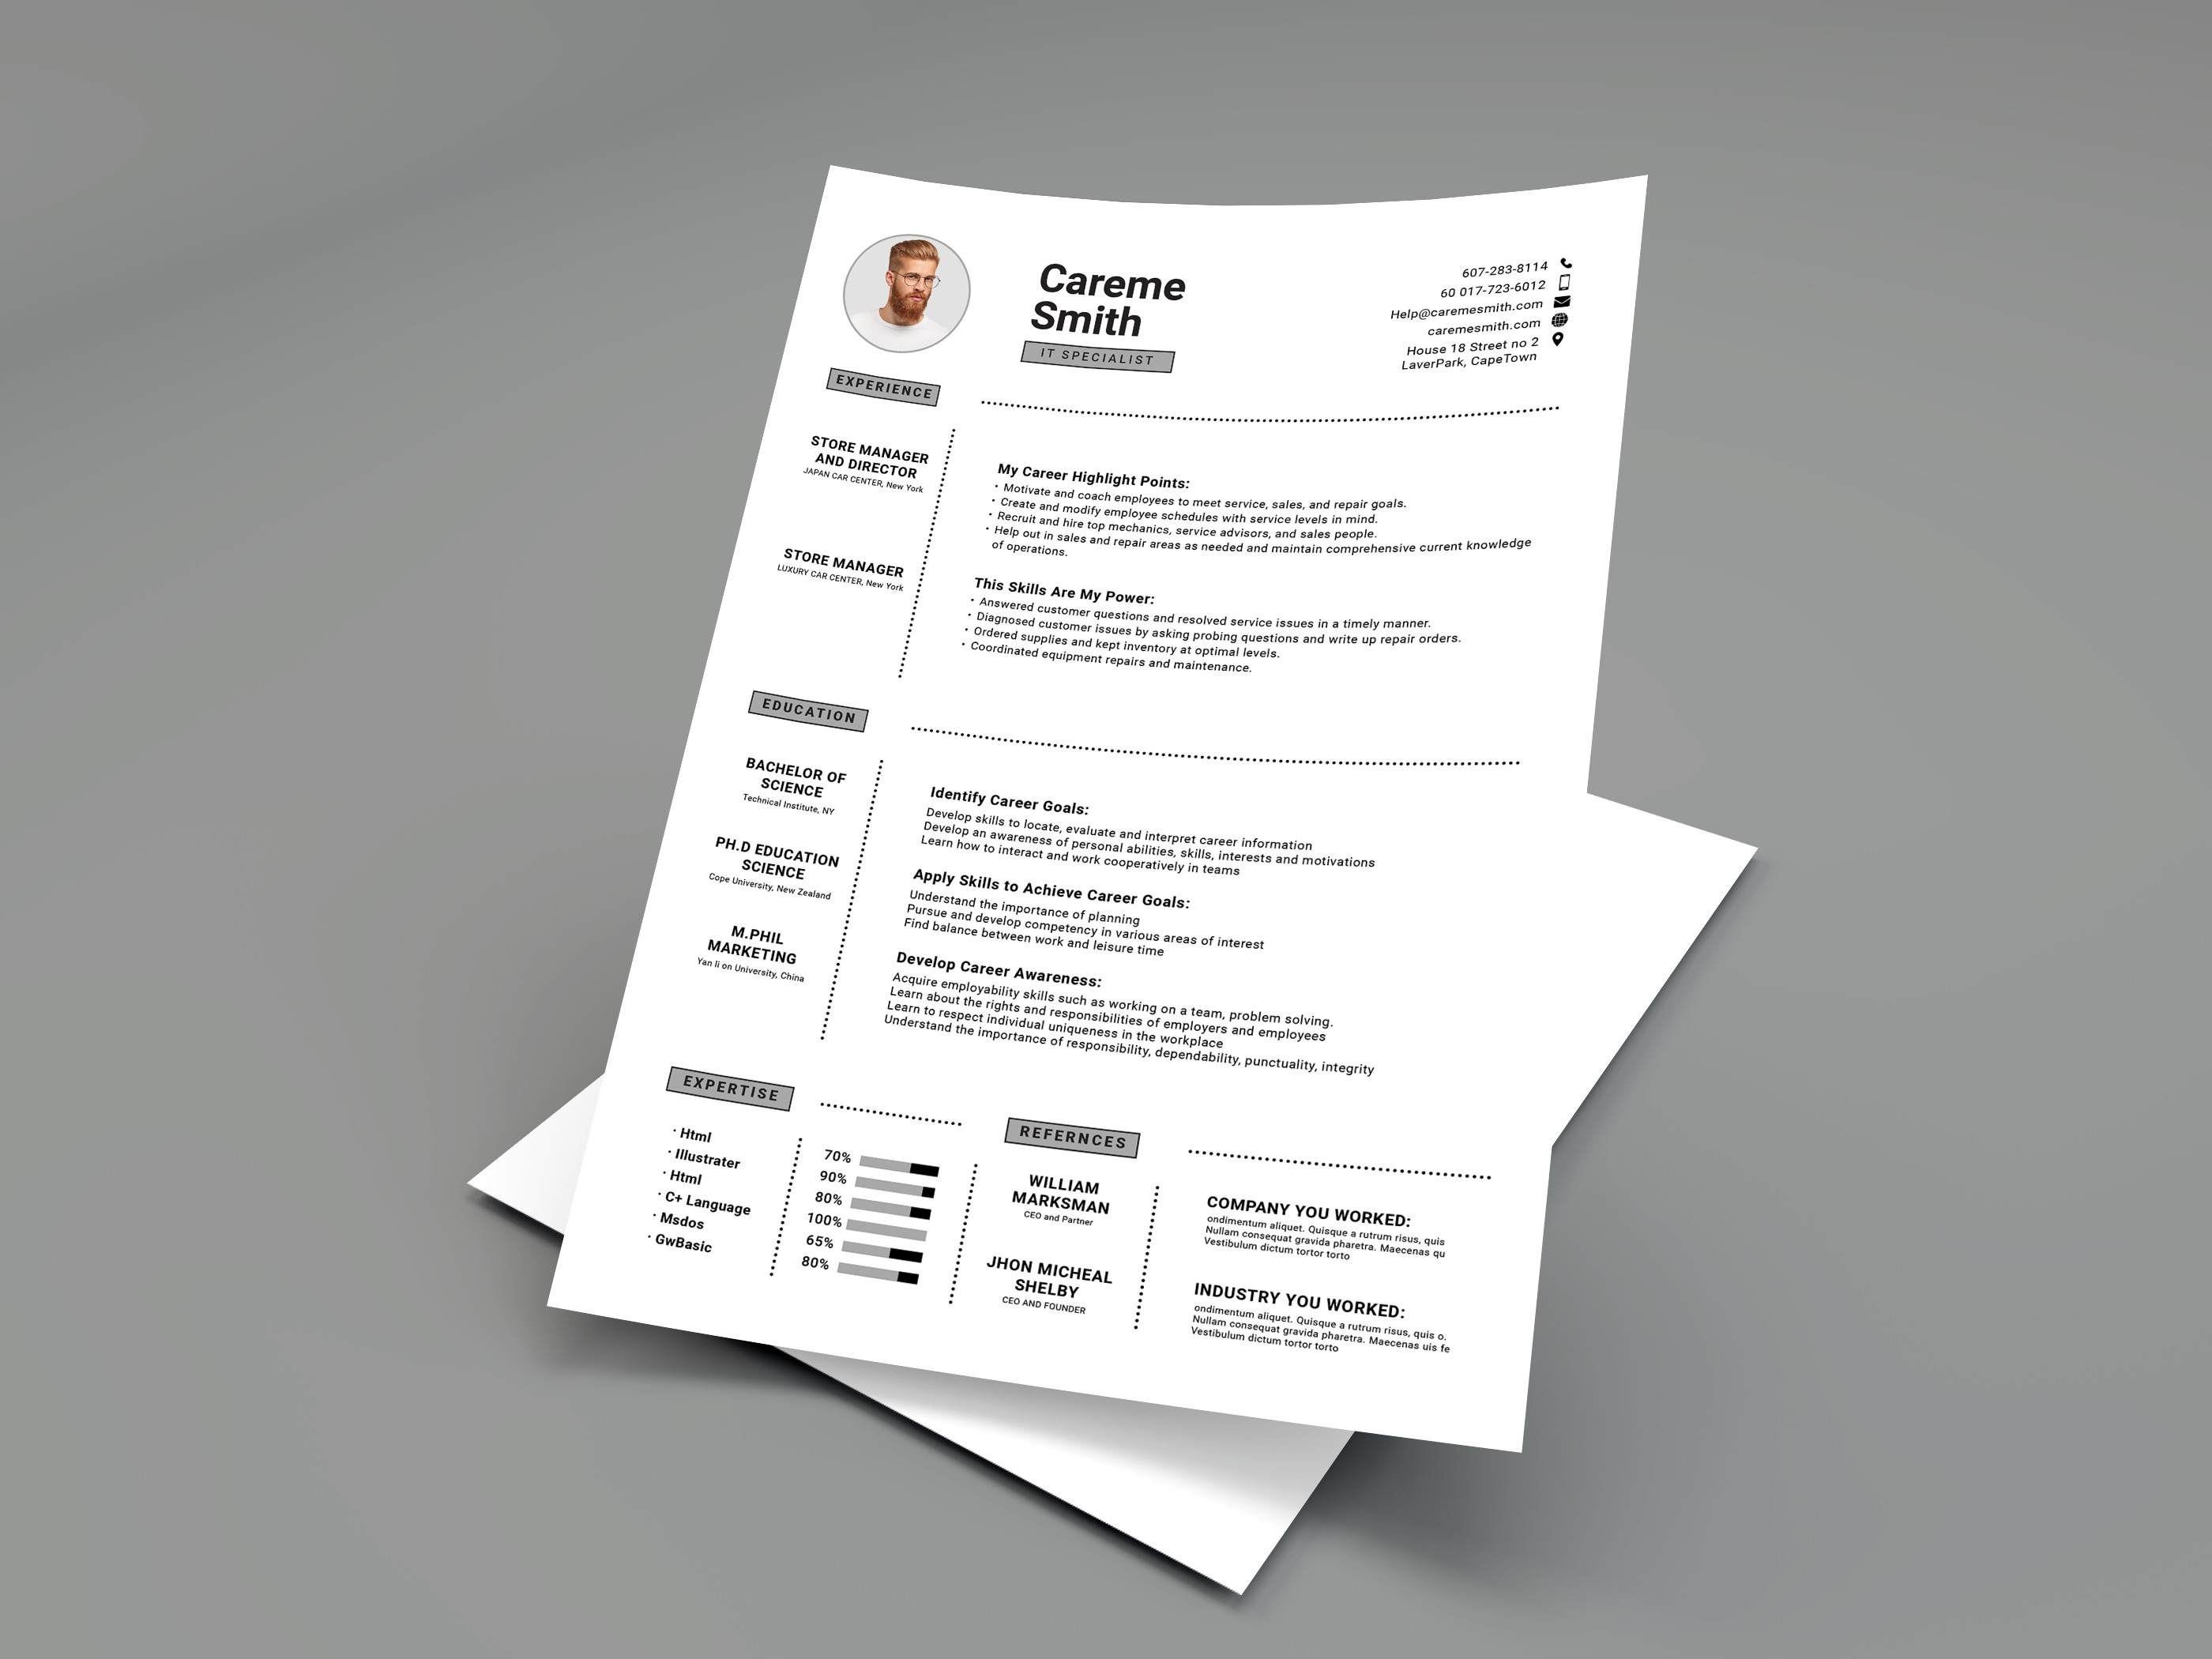 Professional resume template with a simple cover letter.